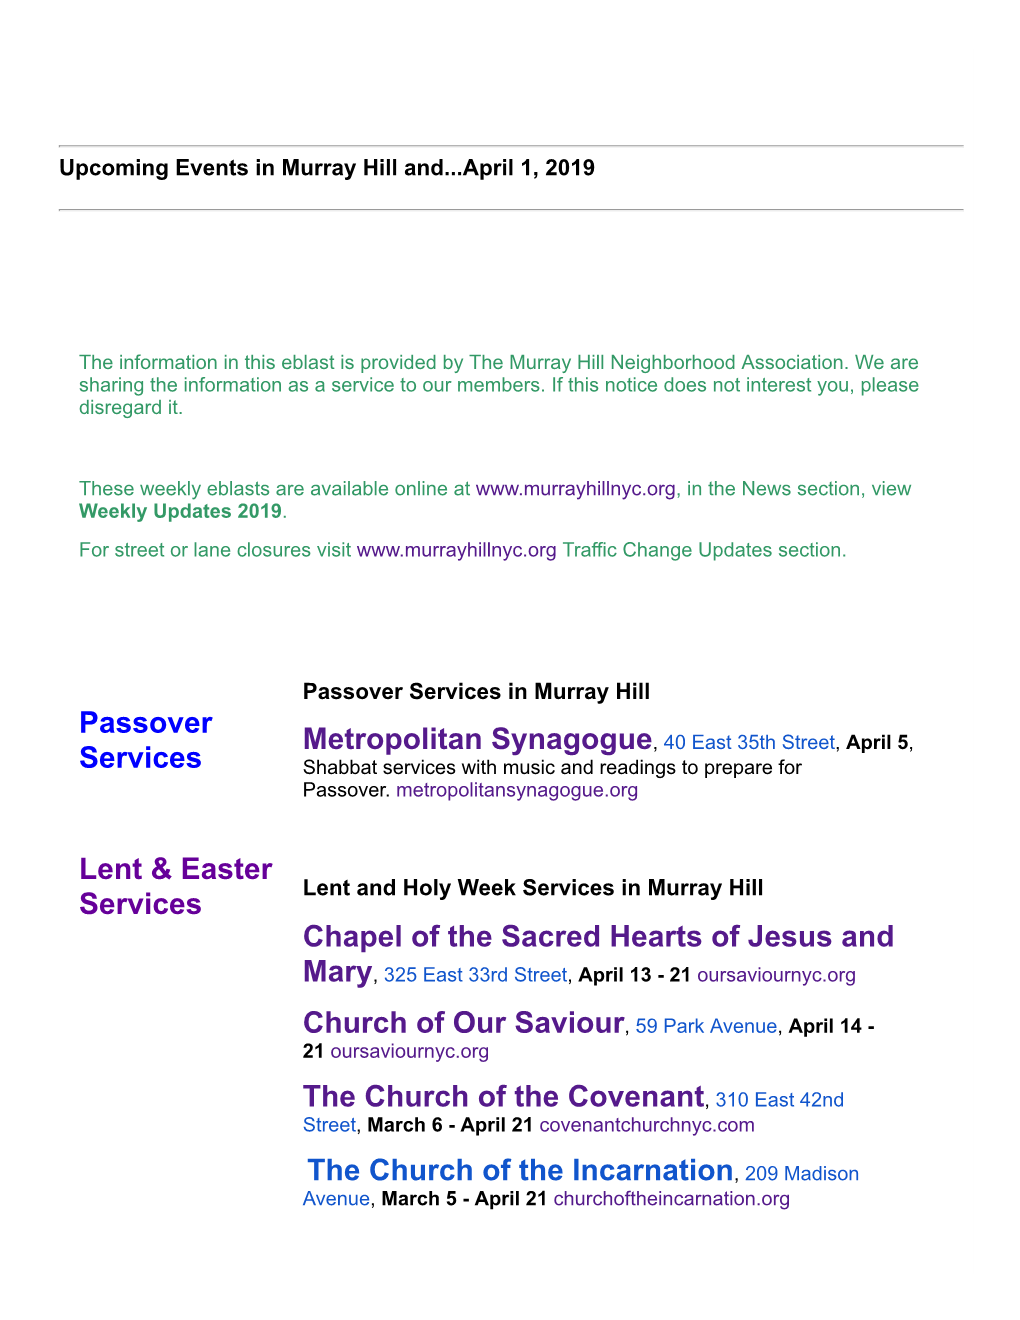 Passover Services Metropolitan Synagogue, 40 East 35Th Street